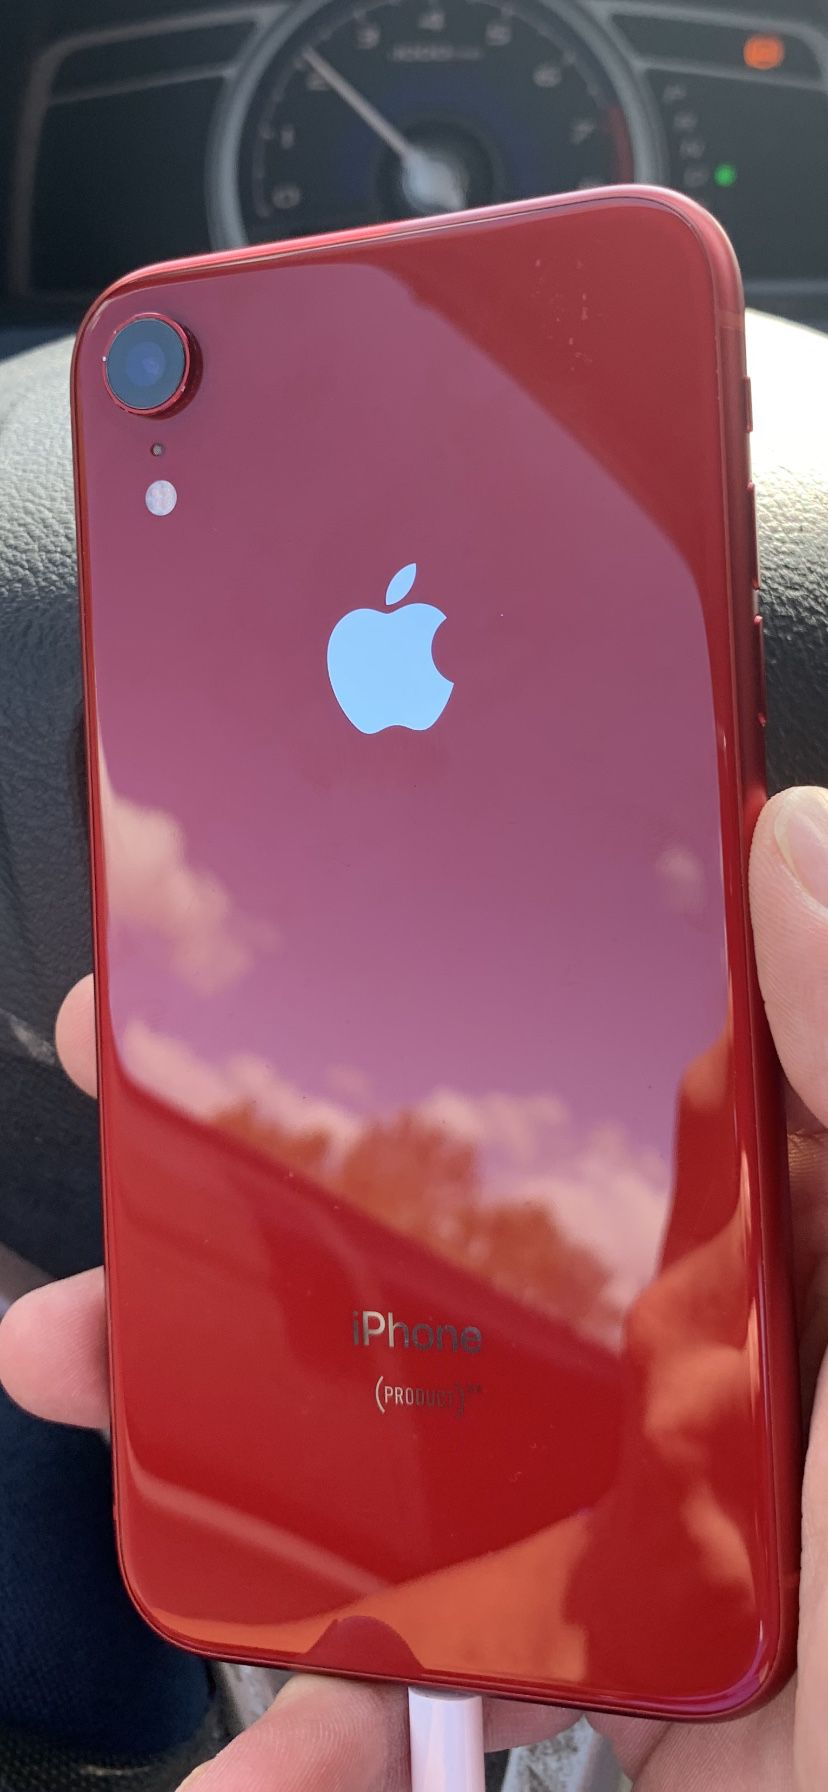 iPhone XR Red 64 GB FOR Simple Mobile only. This phone have ready plan services working only for SIMPLE MOBILE